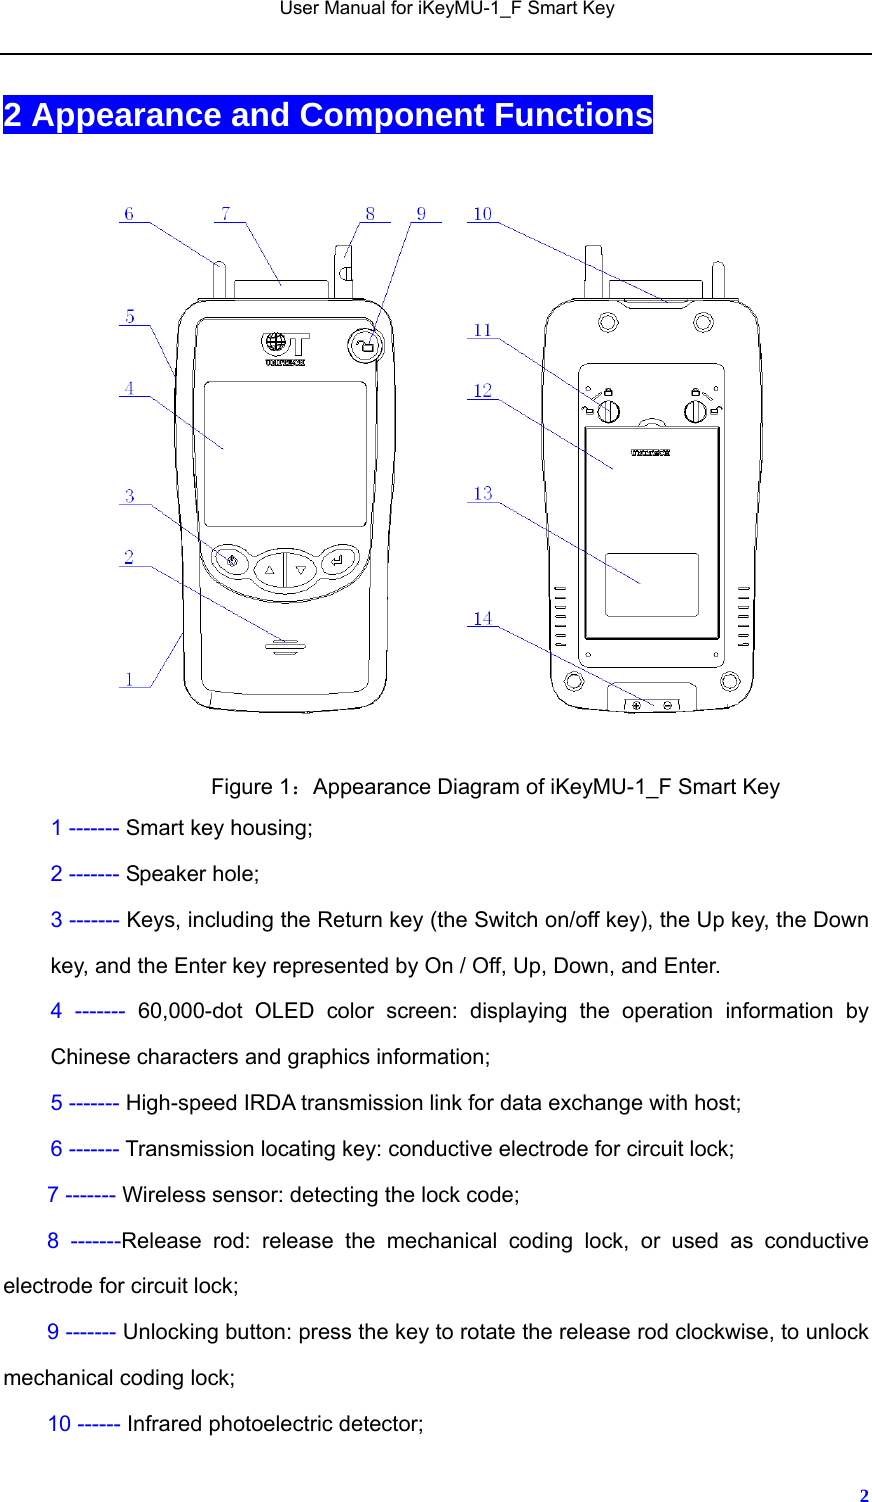   User Manual for iKeyMU-1_F Smart Key       22 Appearance and Component Functions            Figure 1：Appearance Diagram of iKeyMU-1_F Smart Key     1 ------- Smart key housing; 2 ------- Speaker hole; 3 ------- Keys, including the Return key (the Switch on/off key), the Up key, the Down key, and the Enter key represented by On / Off, Up, Down, and Enter.   4 ------- 60,000-dot OLED color screen: displaying the operation information by Chinese characters and graphics information; 5 ------- High-speed IRDA transmission link for data exchange with host; 6 ------- Transmission locating key: conductive electrode for circuit lock; 7 ------- Wireless sensor: detecting the lock code; 8 -------Release rod: release the mechanical coding lock, or used as conductive electrode for circuit lock; 9 ------- Unlocking button: press the key to rotate the release rod clockwise, to unlock mechanical coding lock; 10 ------ Infrared photoelectric detector; 